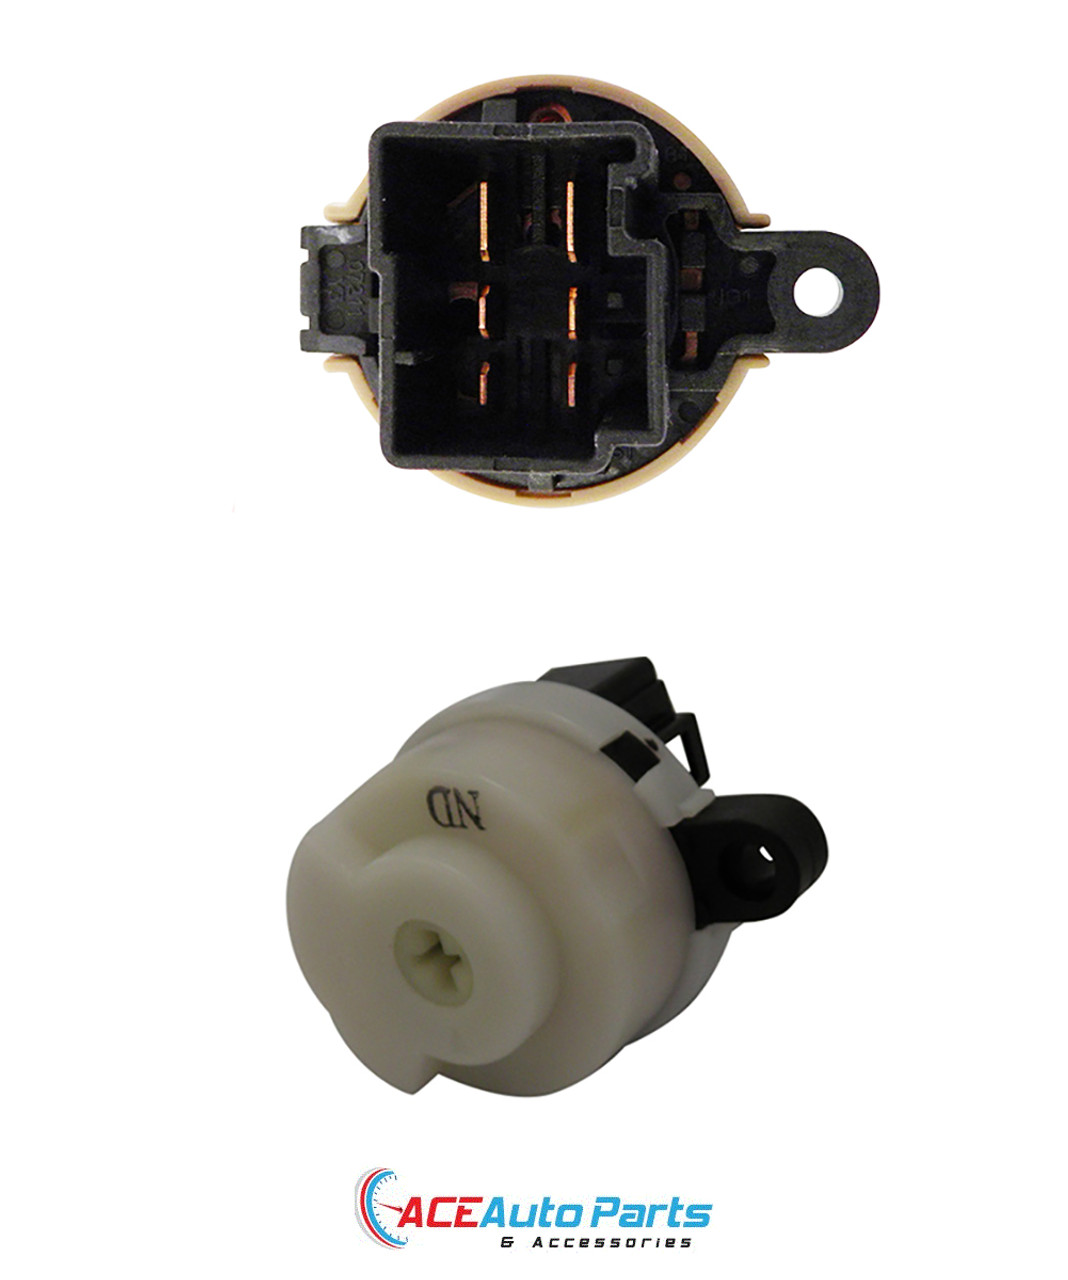 New Ignition Switch For Mazda 323 05/99 to 03/04 Auto